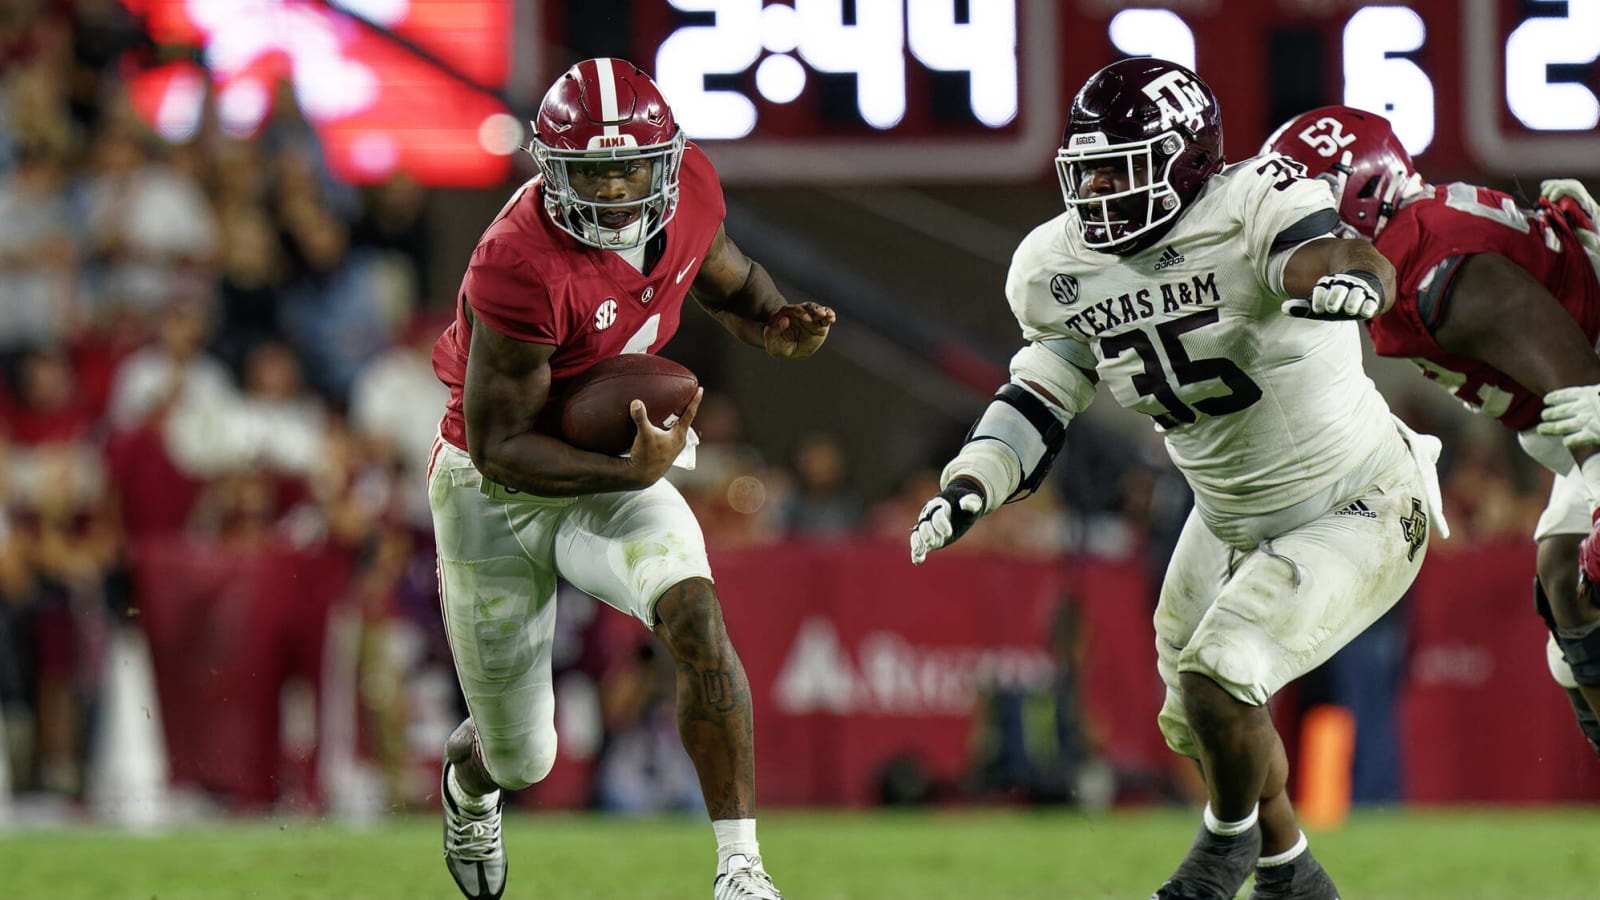 Nick Saban says anxiety factored into Jalen Milroe's iffy start vs Texas A&M